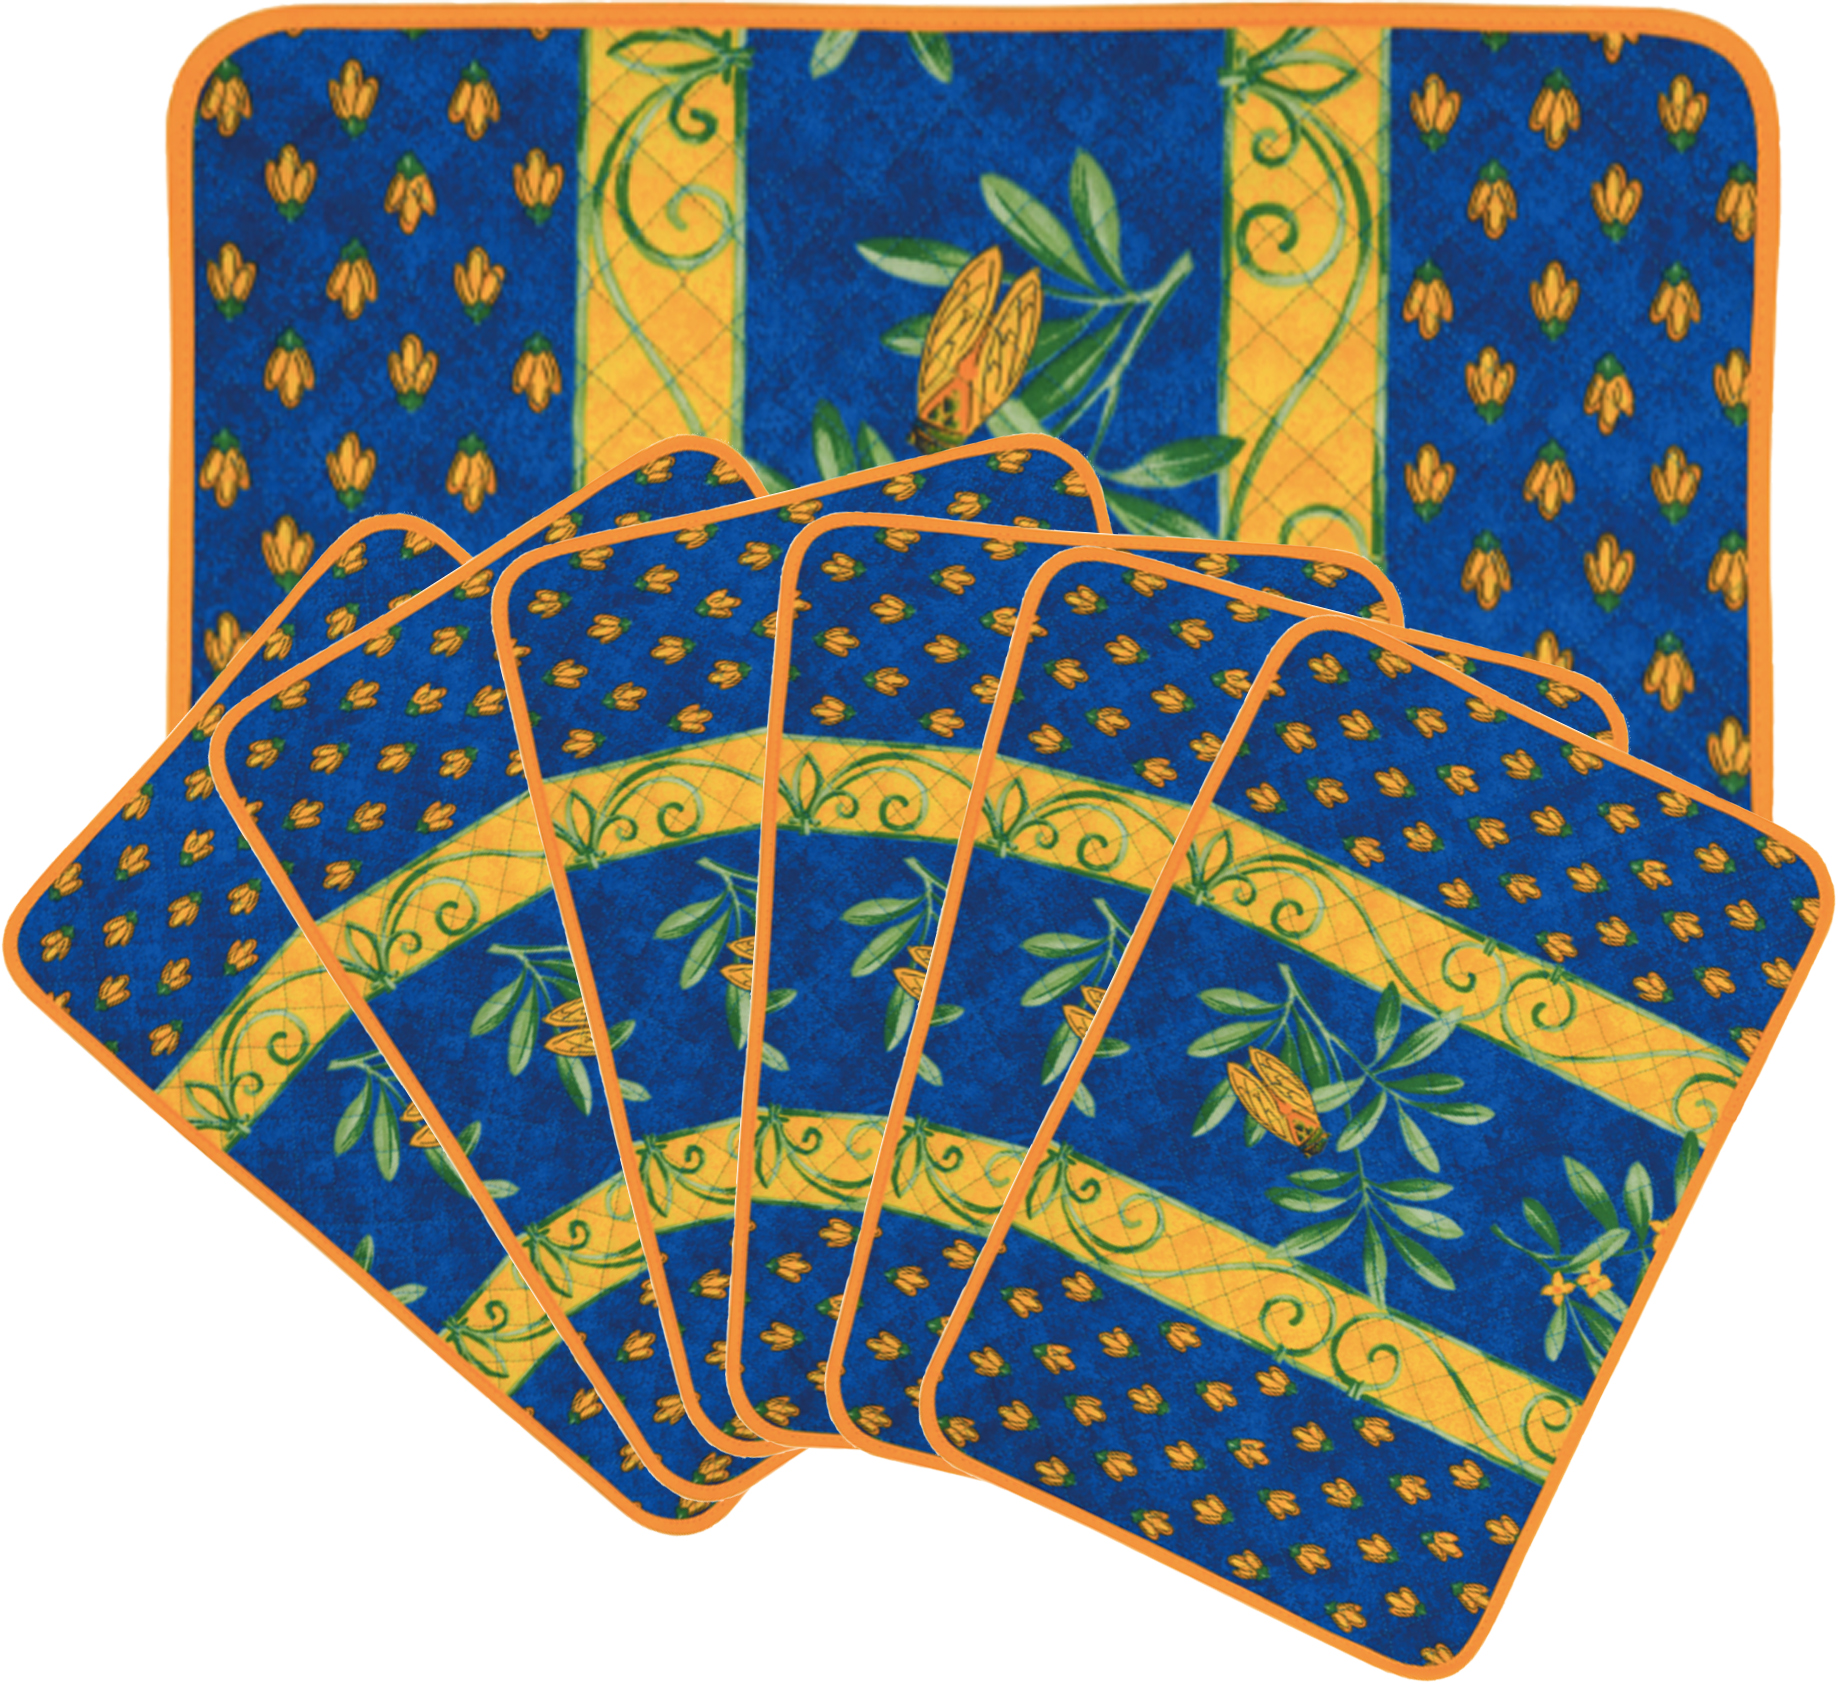 French Acrylic Coated Placemats Collection "Cigale": Olives & Cicadas Motif, Size 17" x 11", Price $94.95 for a Set of 6